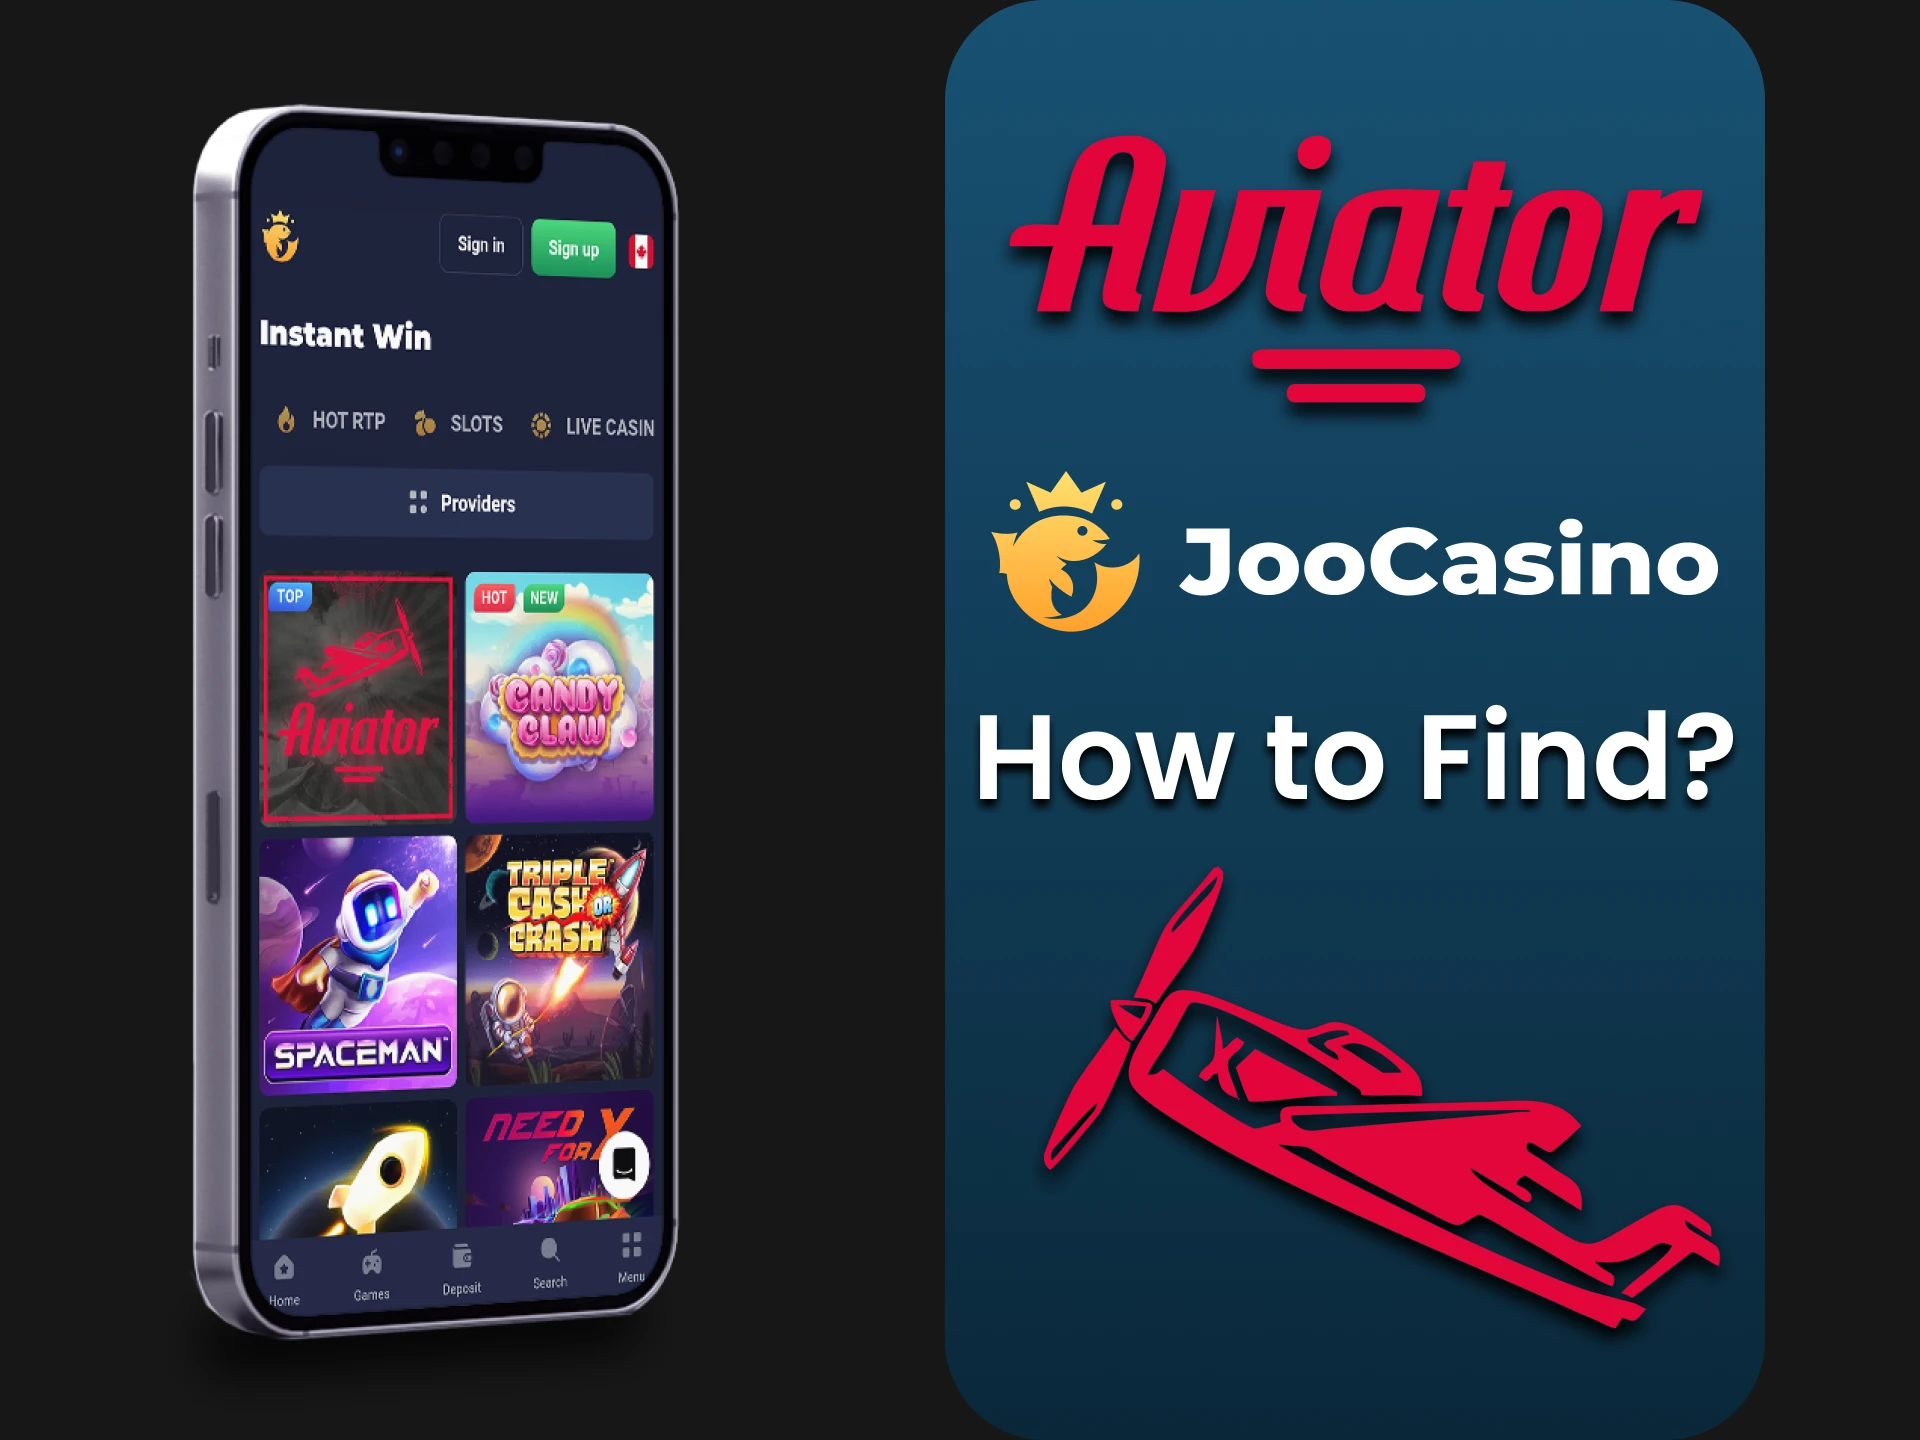 Choose Aviator in the games section of the Joo Casino app.